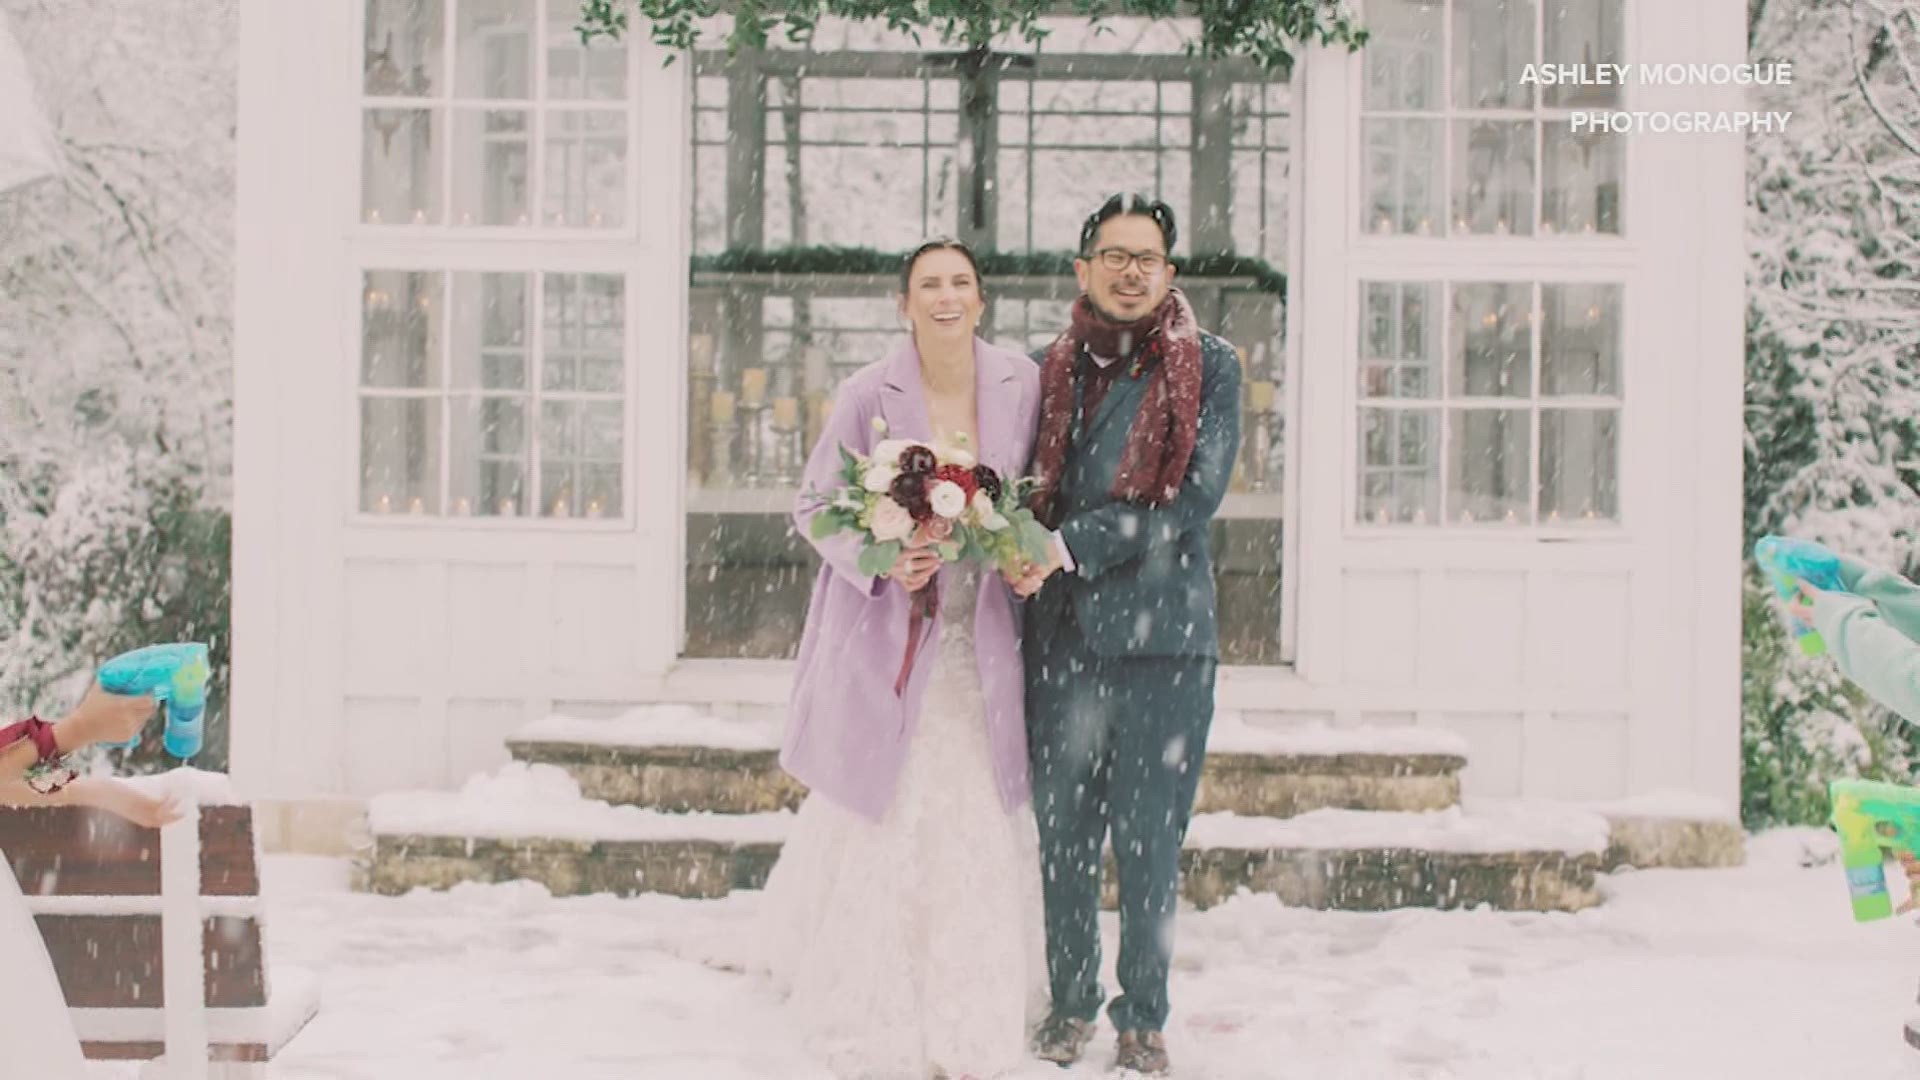 One couple's dream wedding had an unexpected surprise. The date they've had planned for months fell on Sunday, the day College Station got several inches of snow!